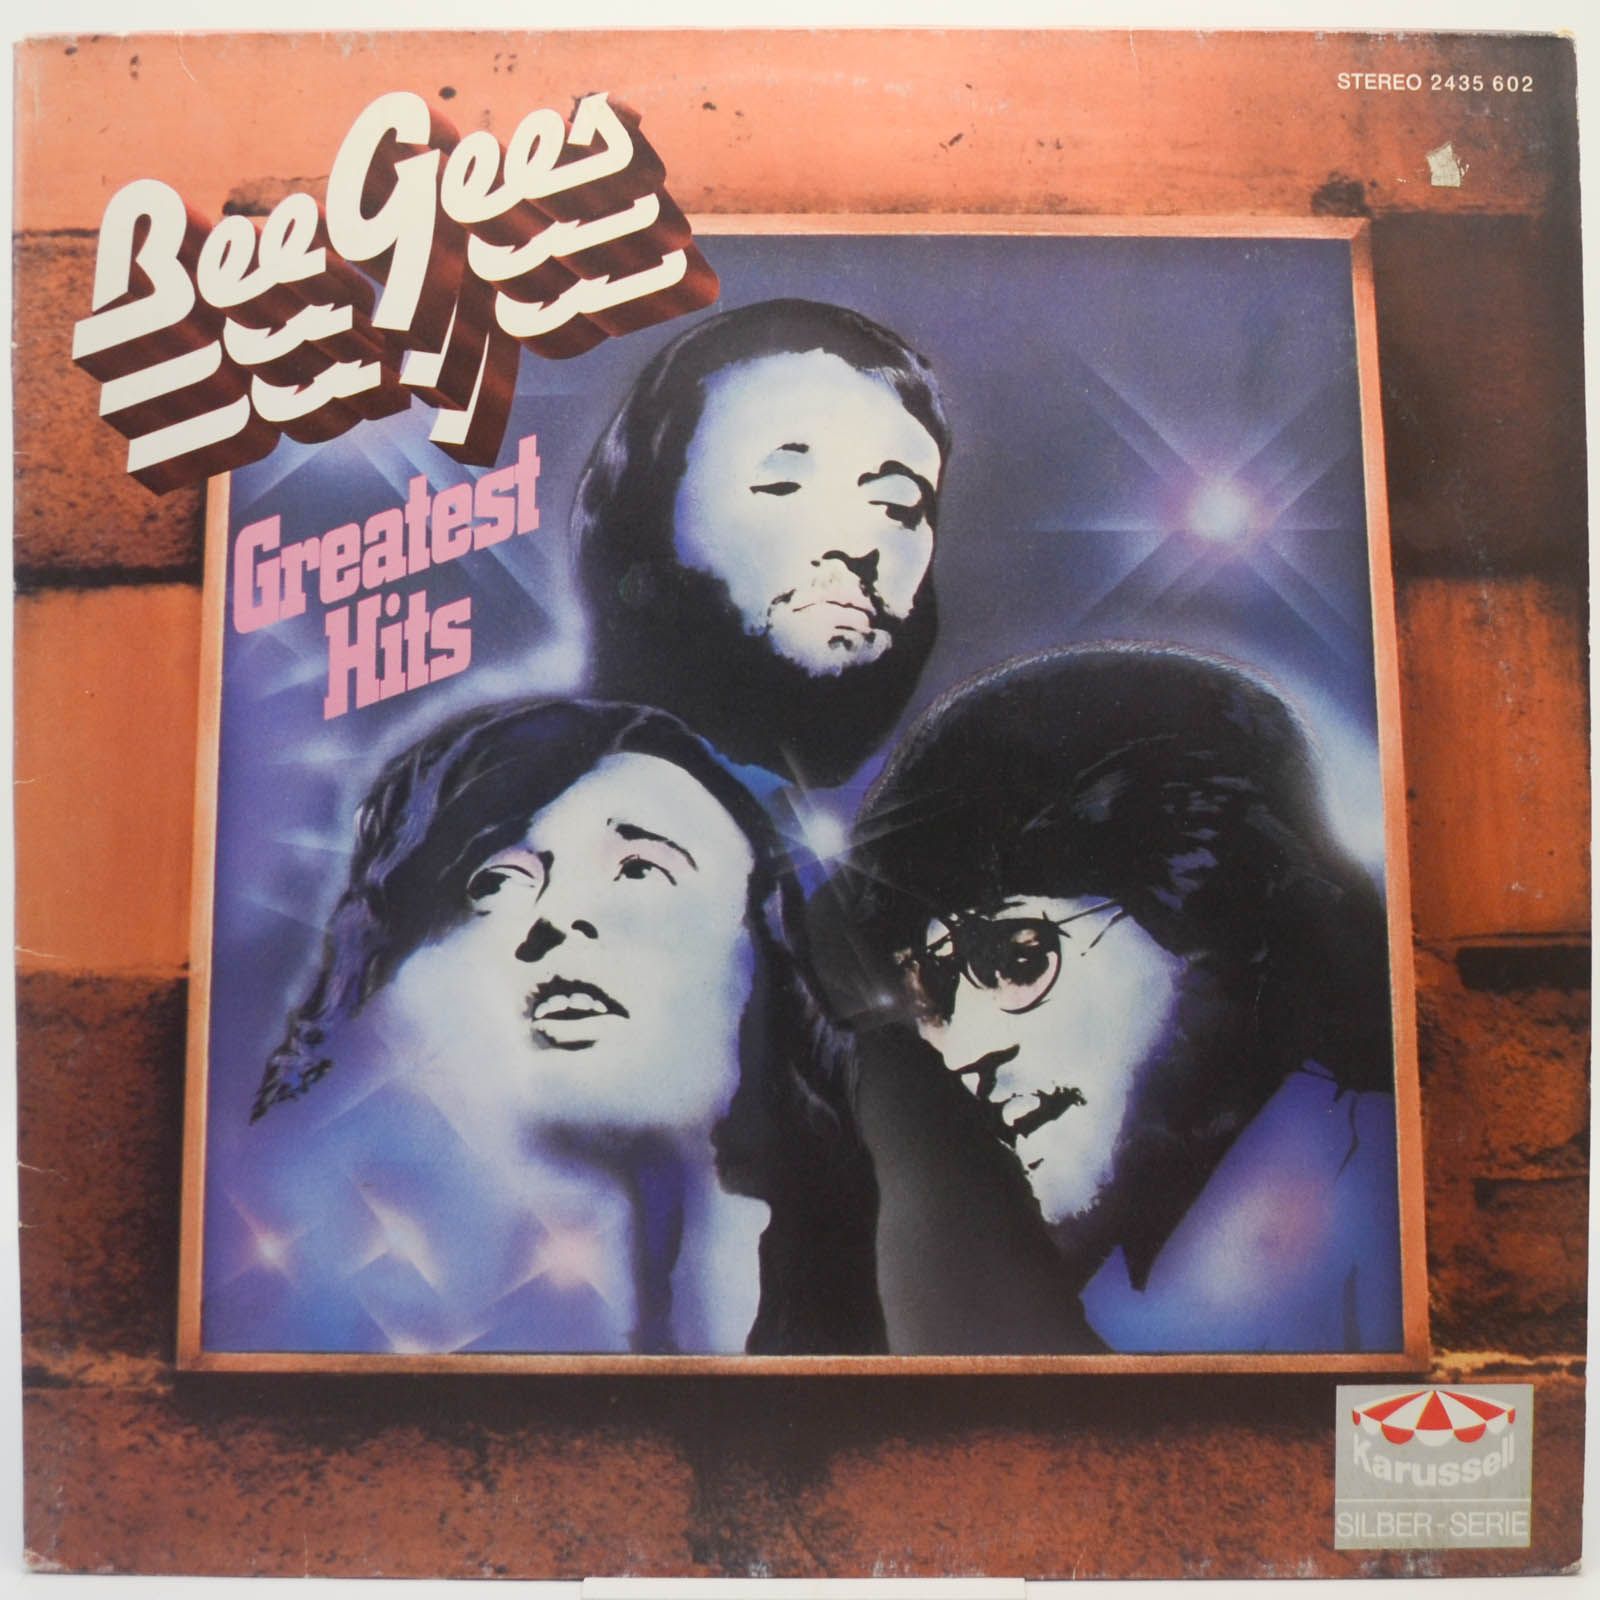 Bee Gees — Greatest Hits, 1975